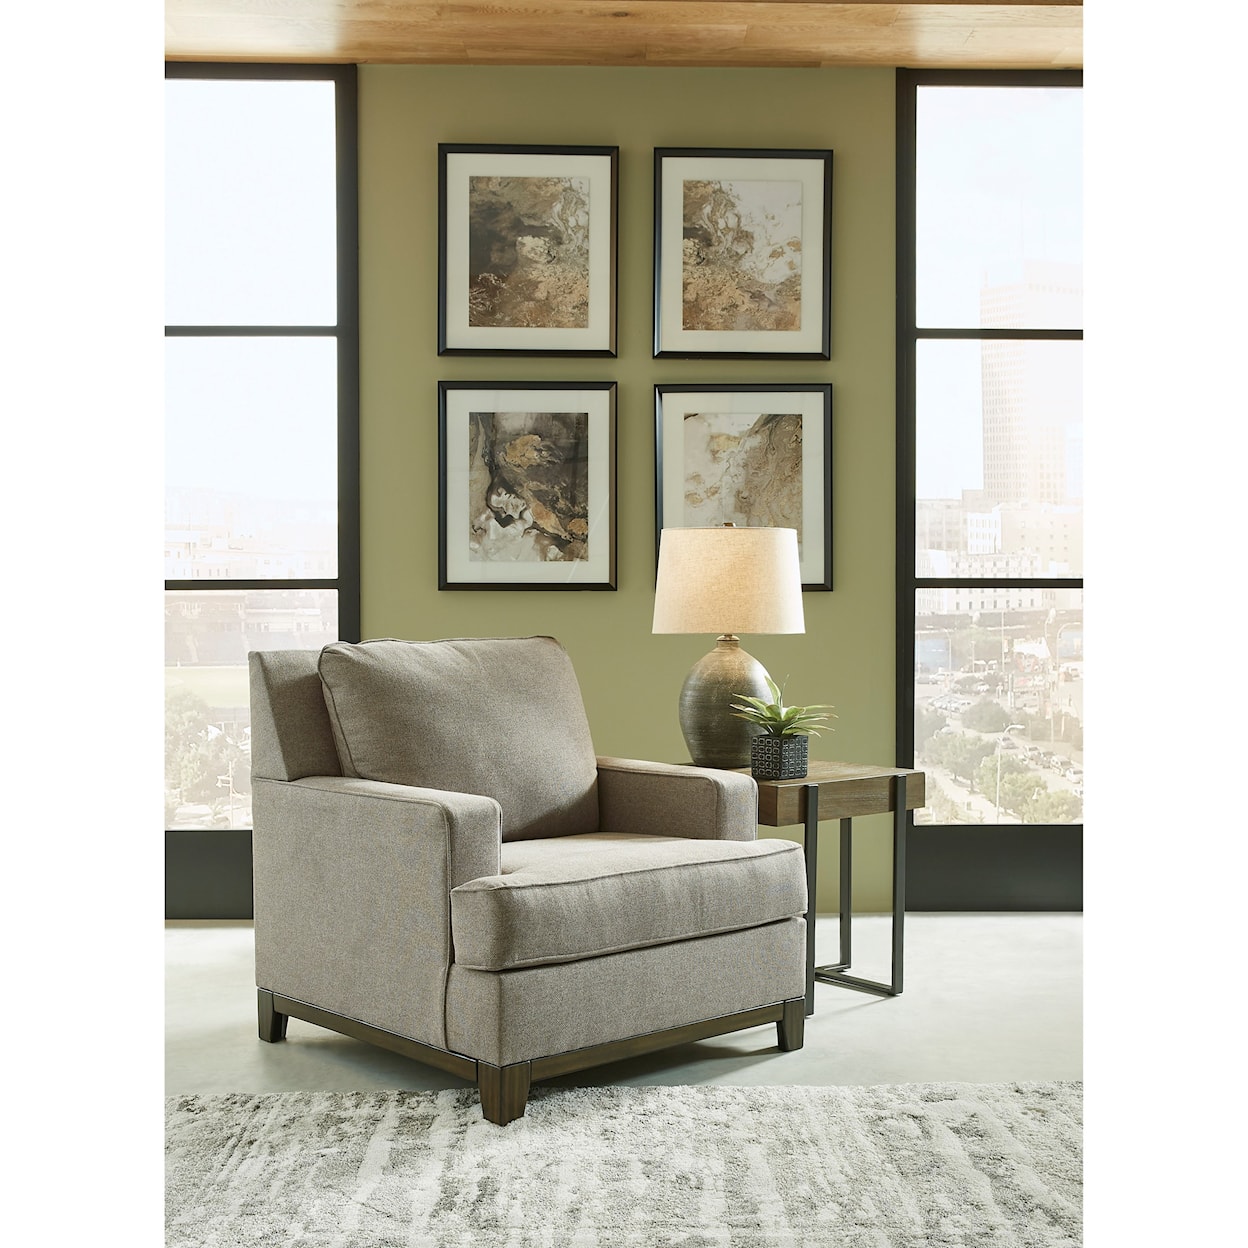 Benchcraft Kaywood Chair and Ottoman